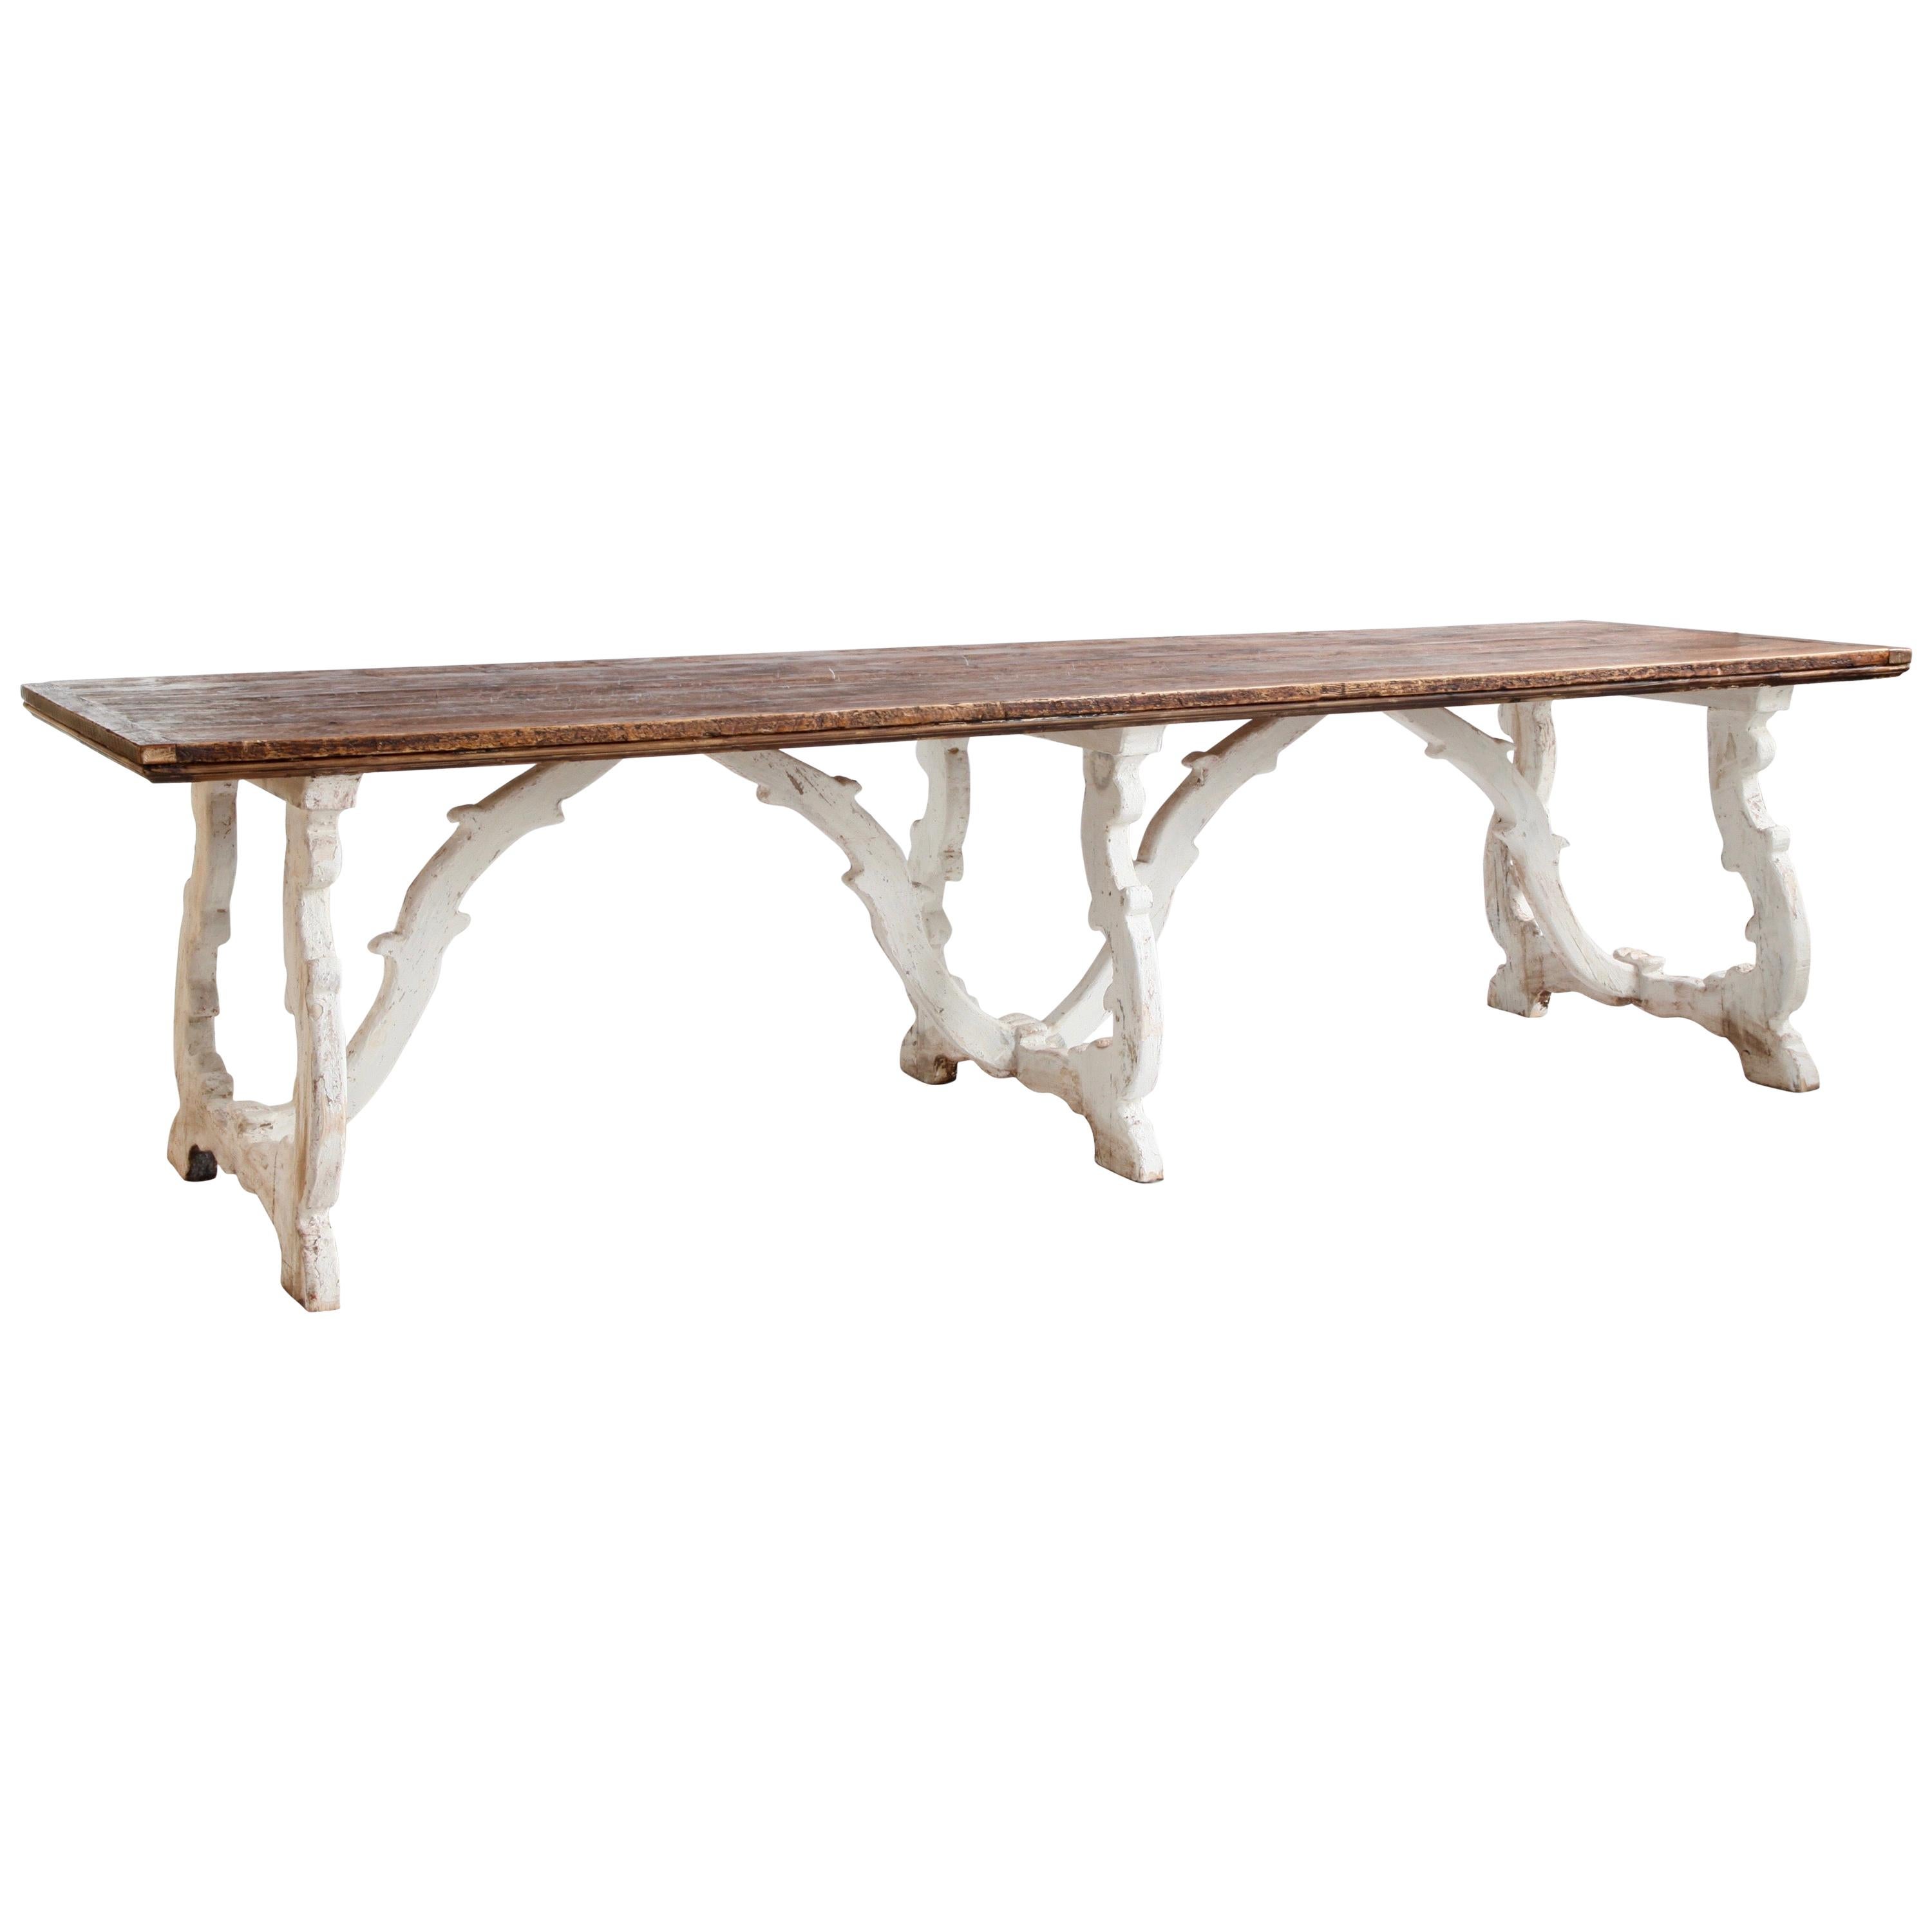 Country House Dining Table From Tuscany, Italy